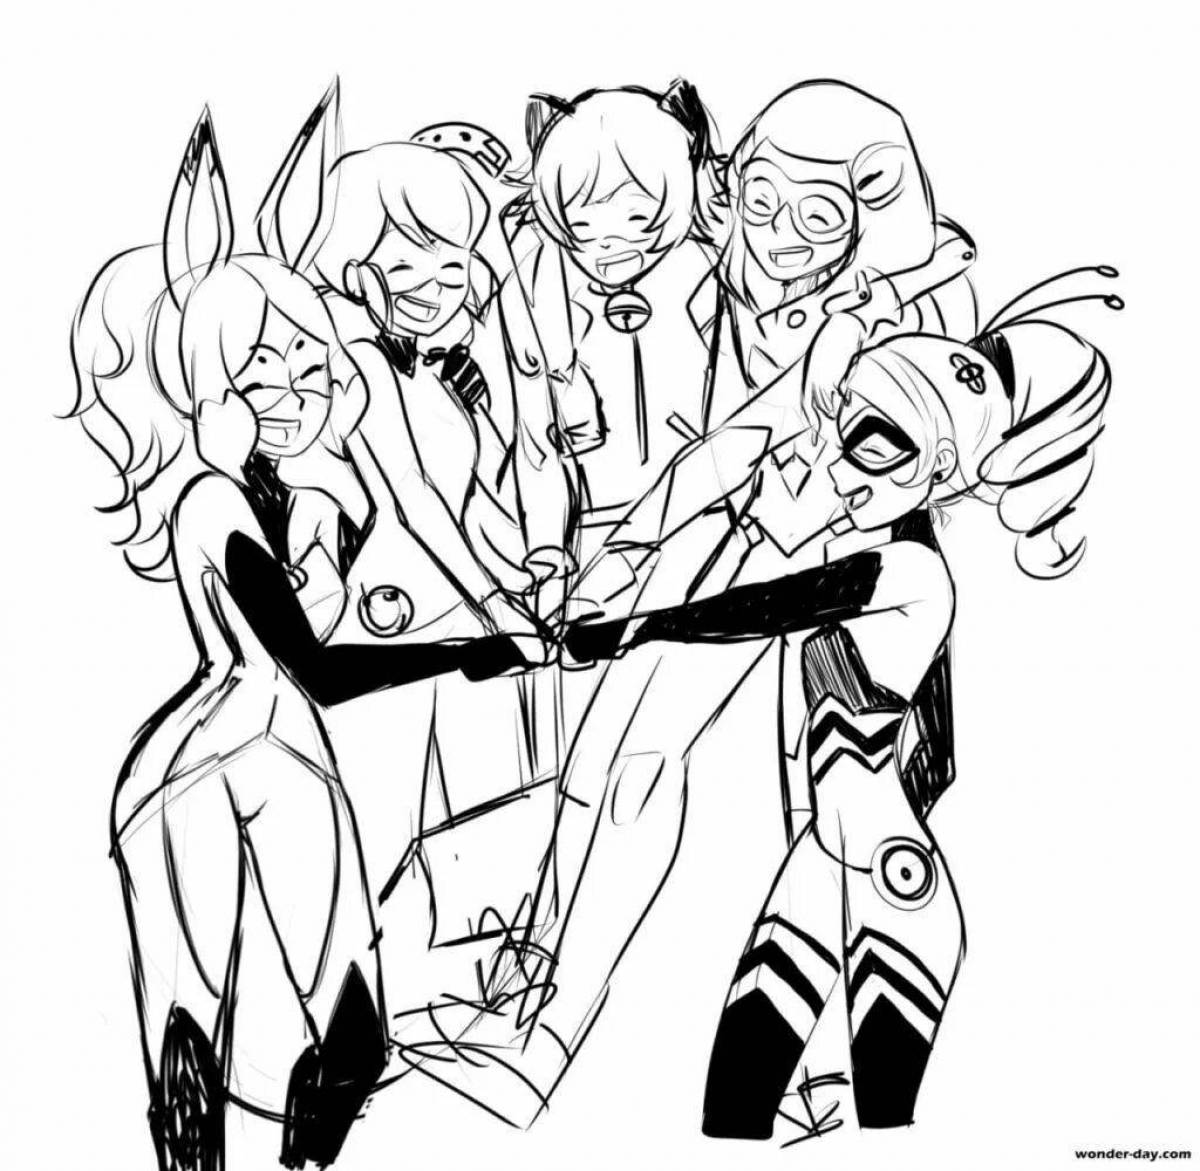 Coloring page of a team of cheerful ladybugs